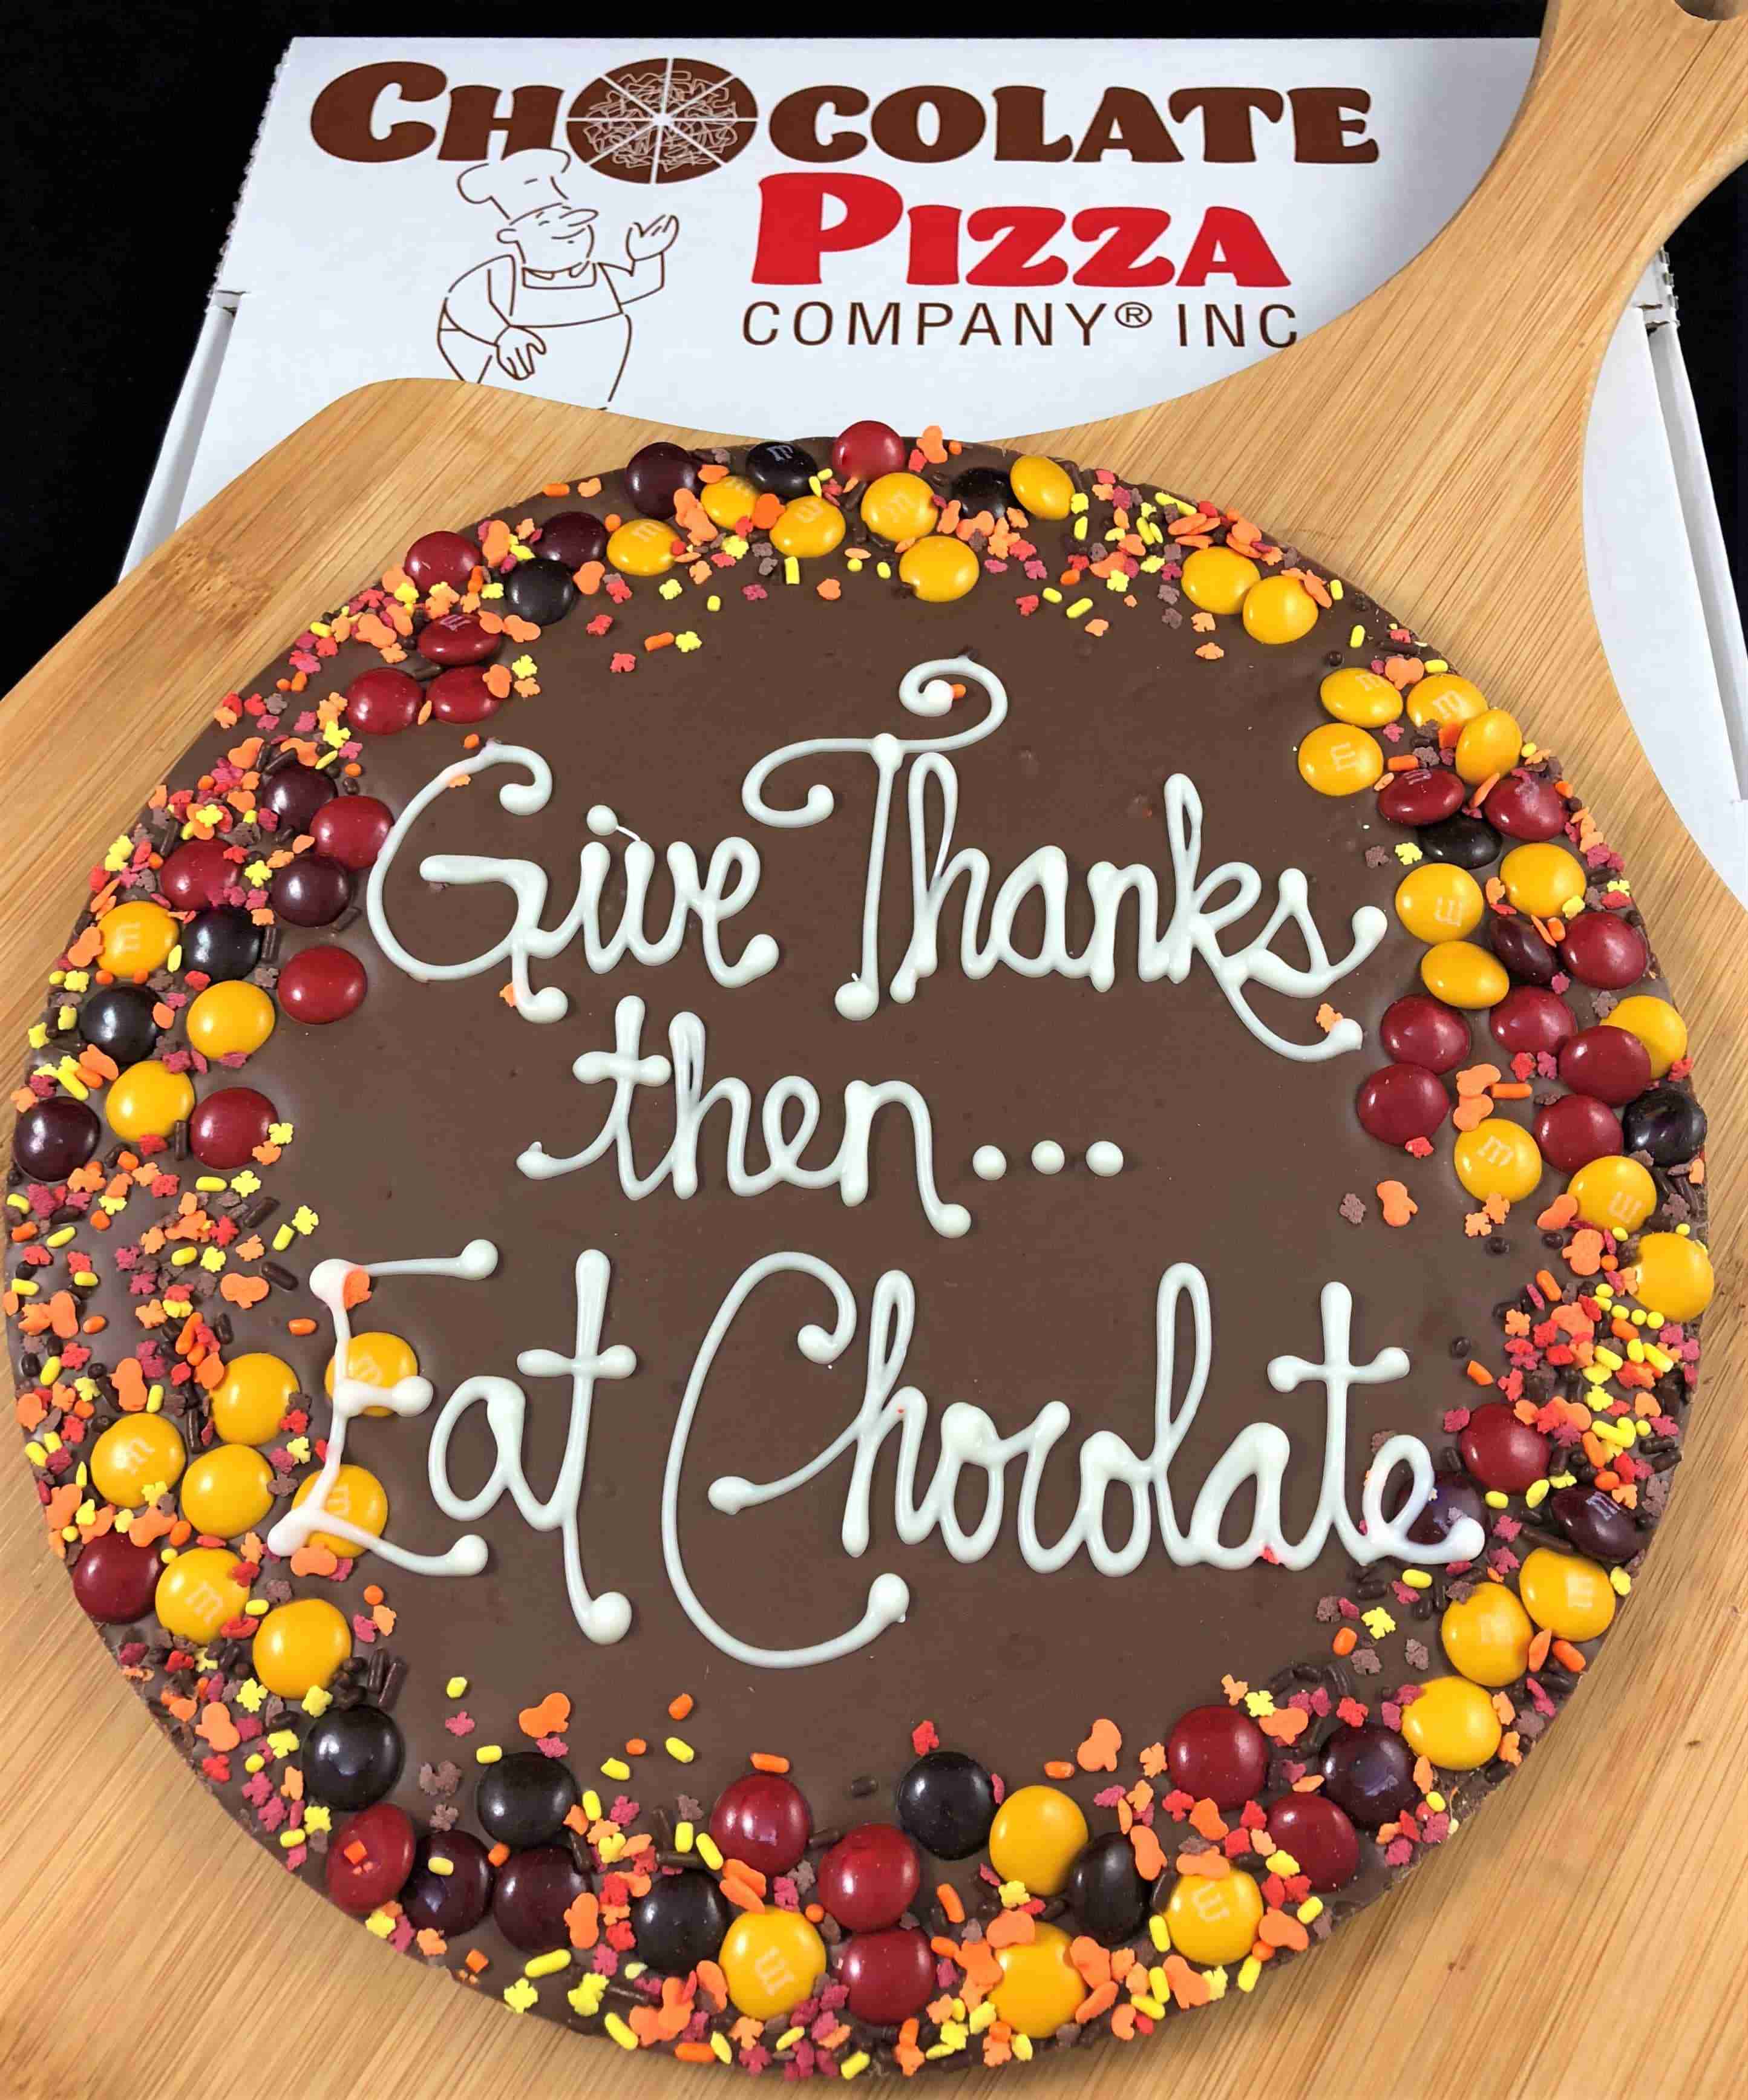 https://www.chocolatepizza.com/wp-content/uploads/2017/05/Give-Thanks-then-Eat-Chocolate-sneel-box-mk-autumn-candy.jpg